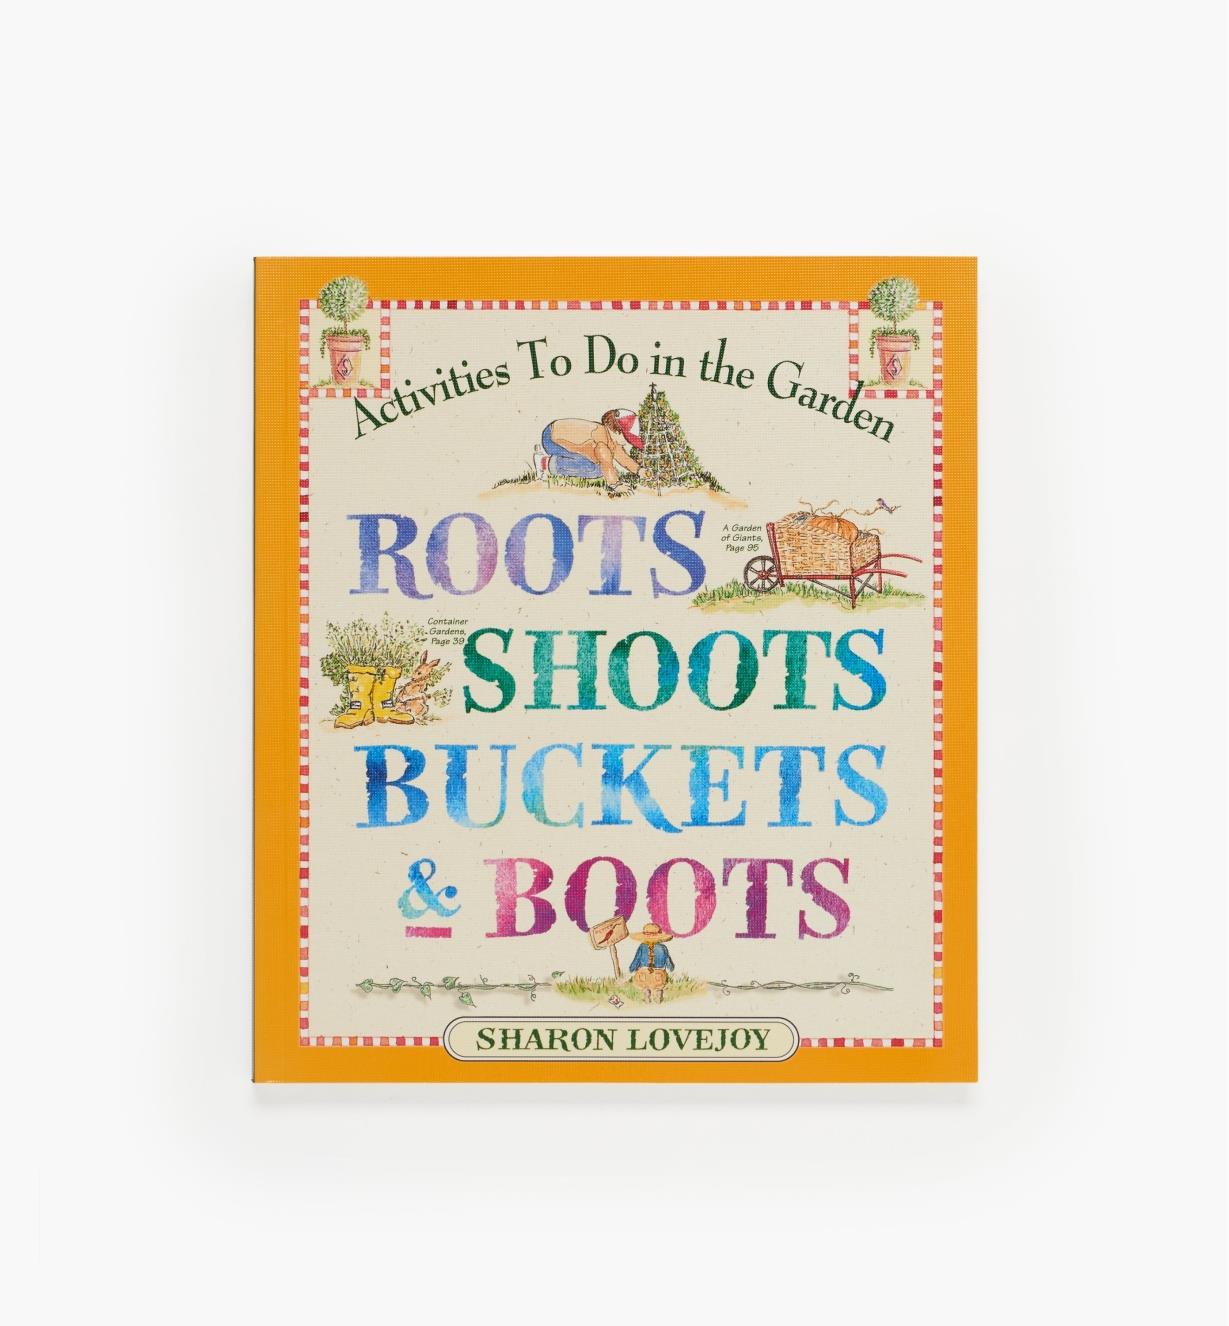 LA638 - Roots, Shoots, Buckets and Boots